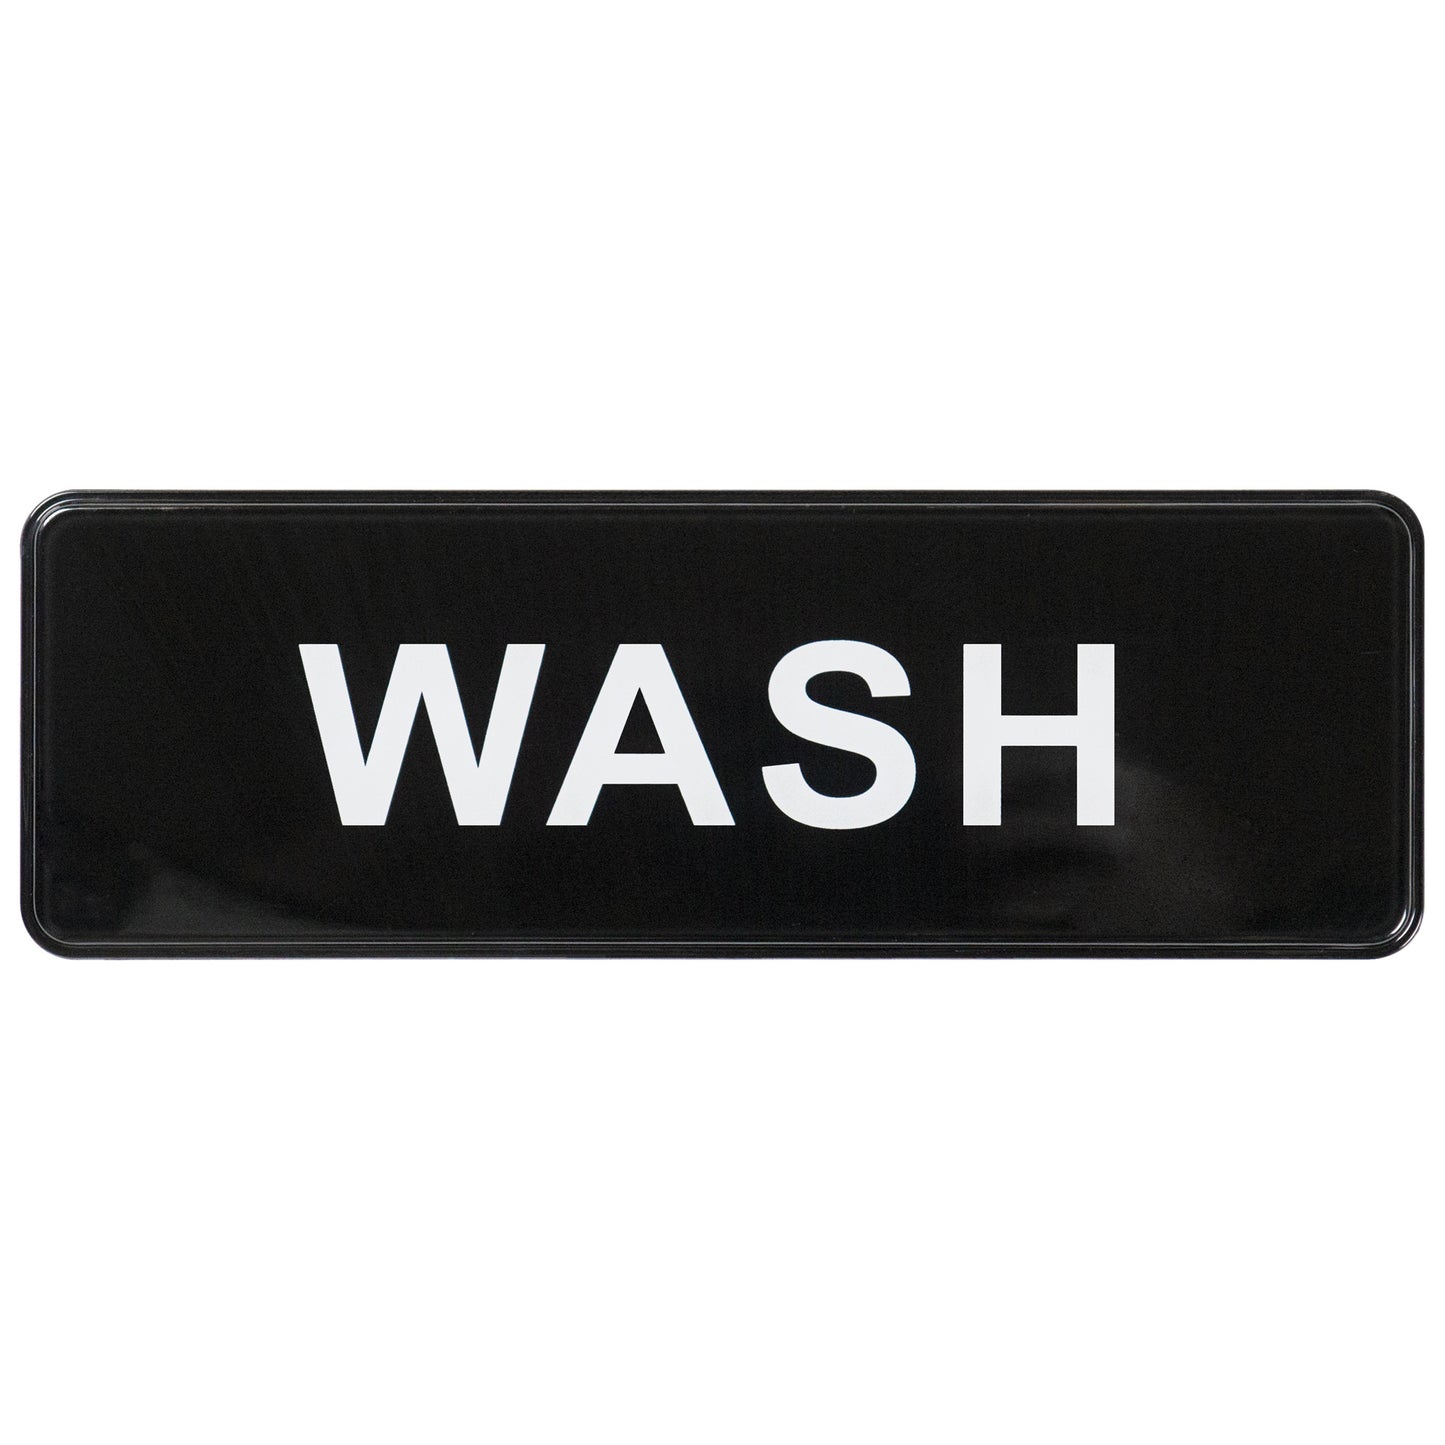 SGN-318 - Information Signs, 9"W x 3"H - SGN-318 - Wash